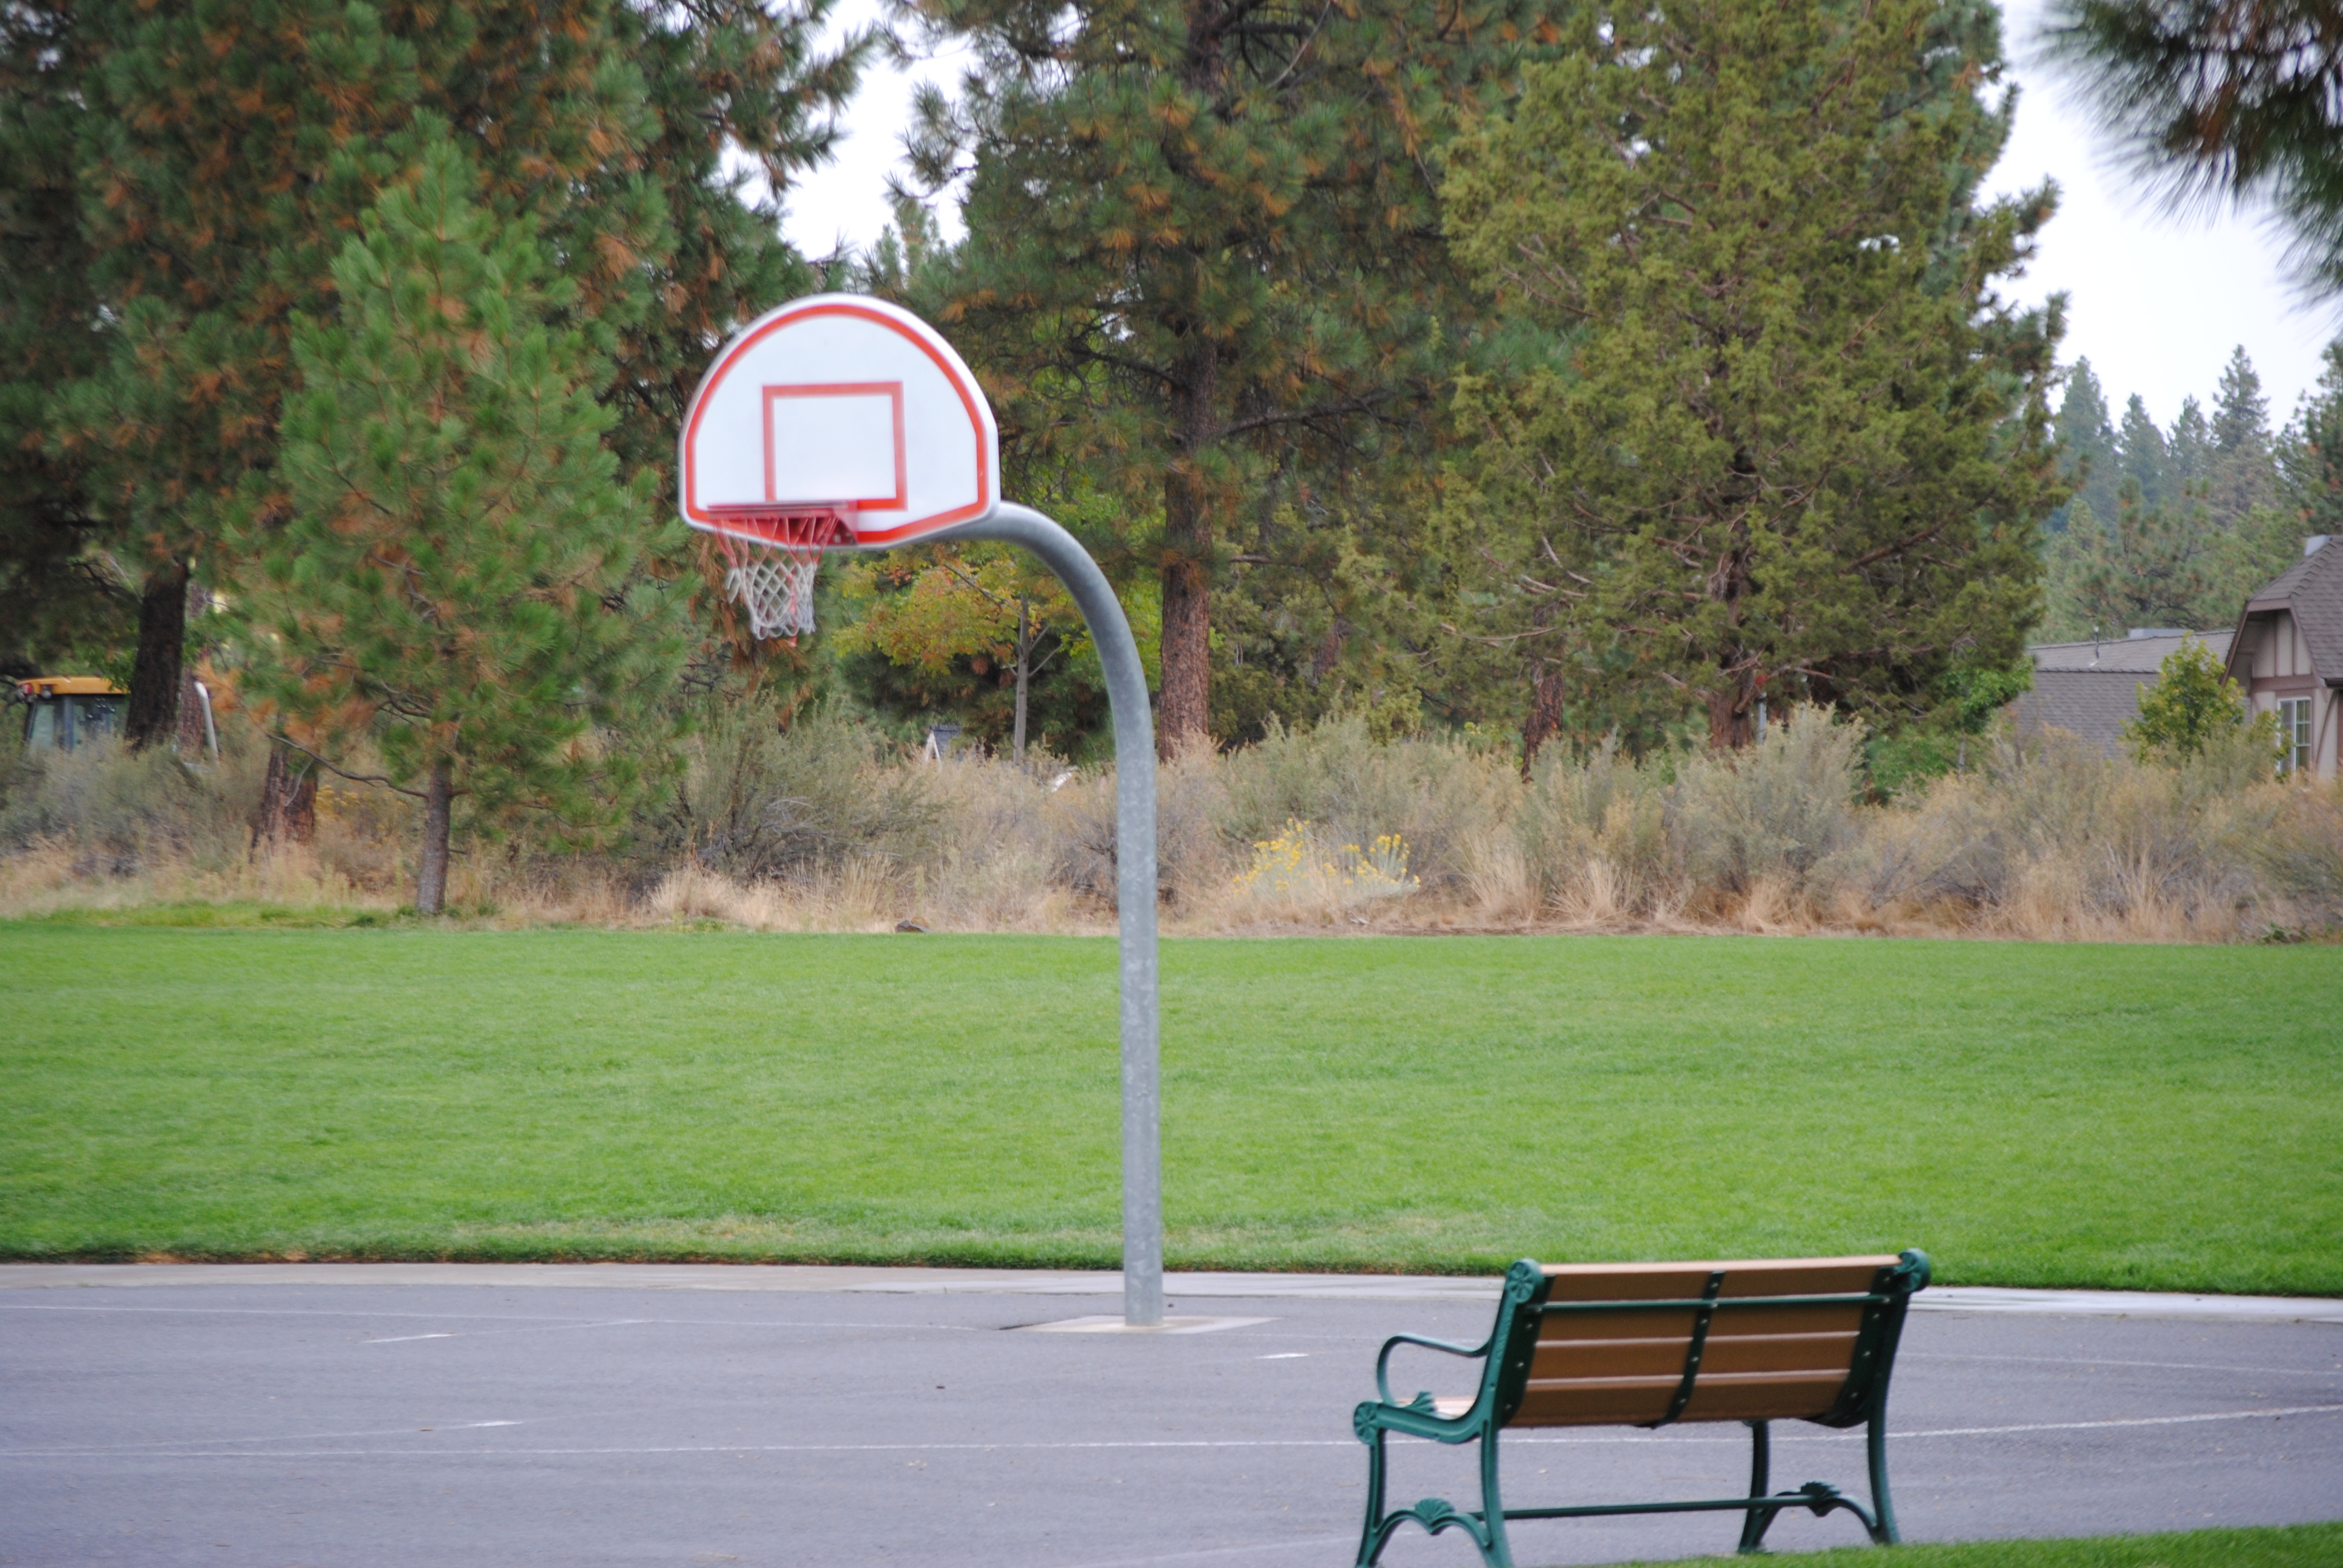 The half court basketball at Lewis and Clark park